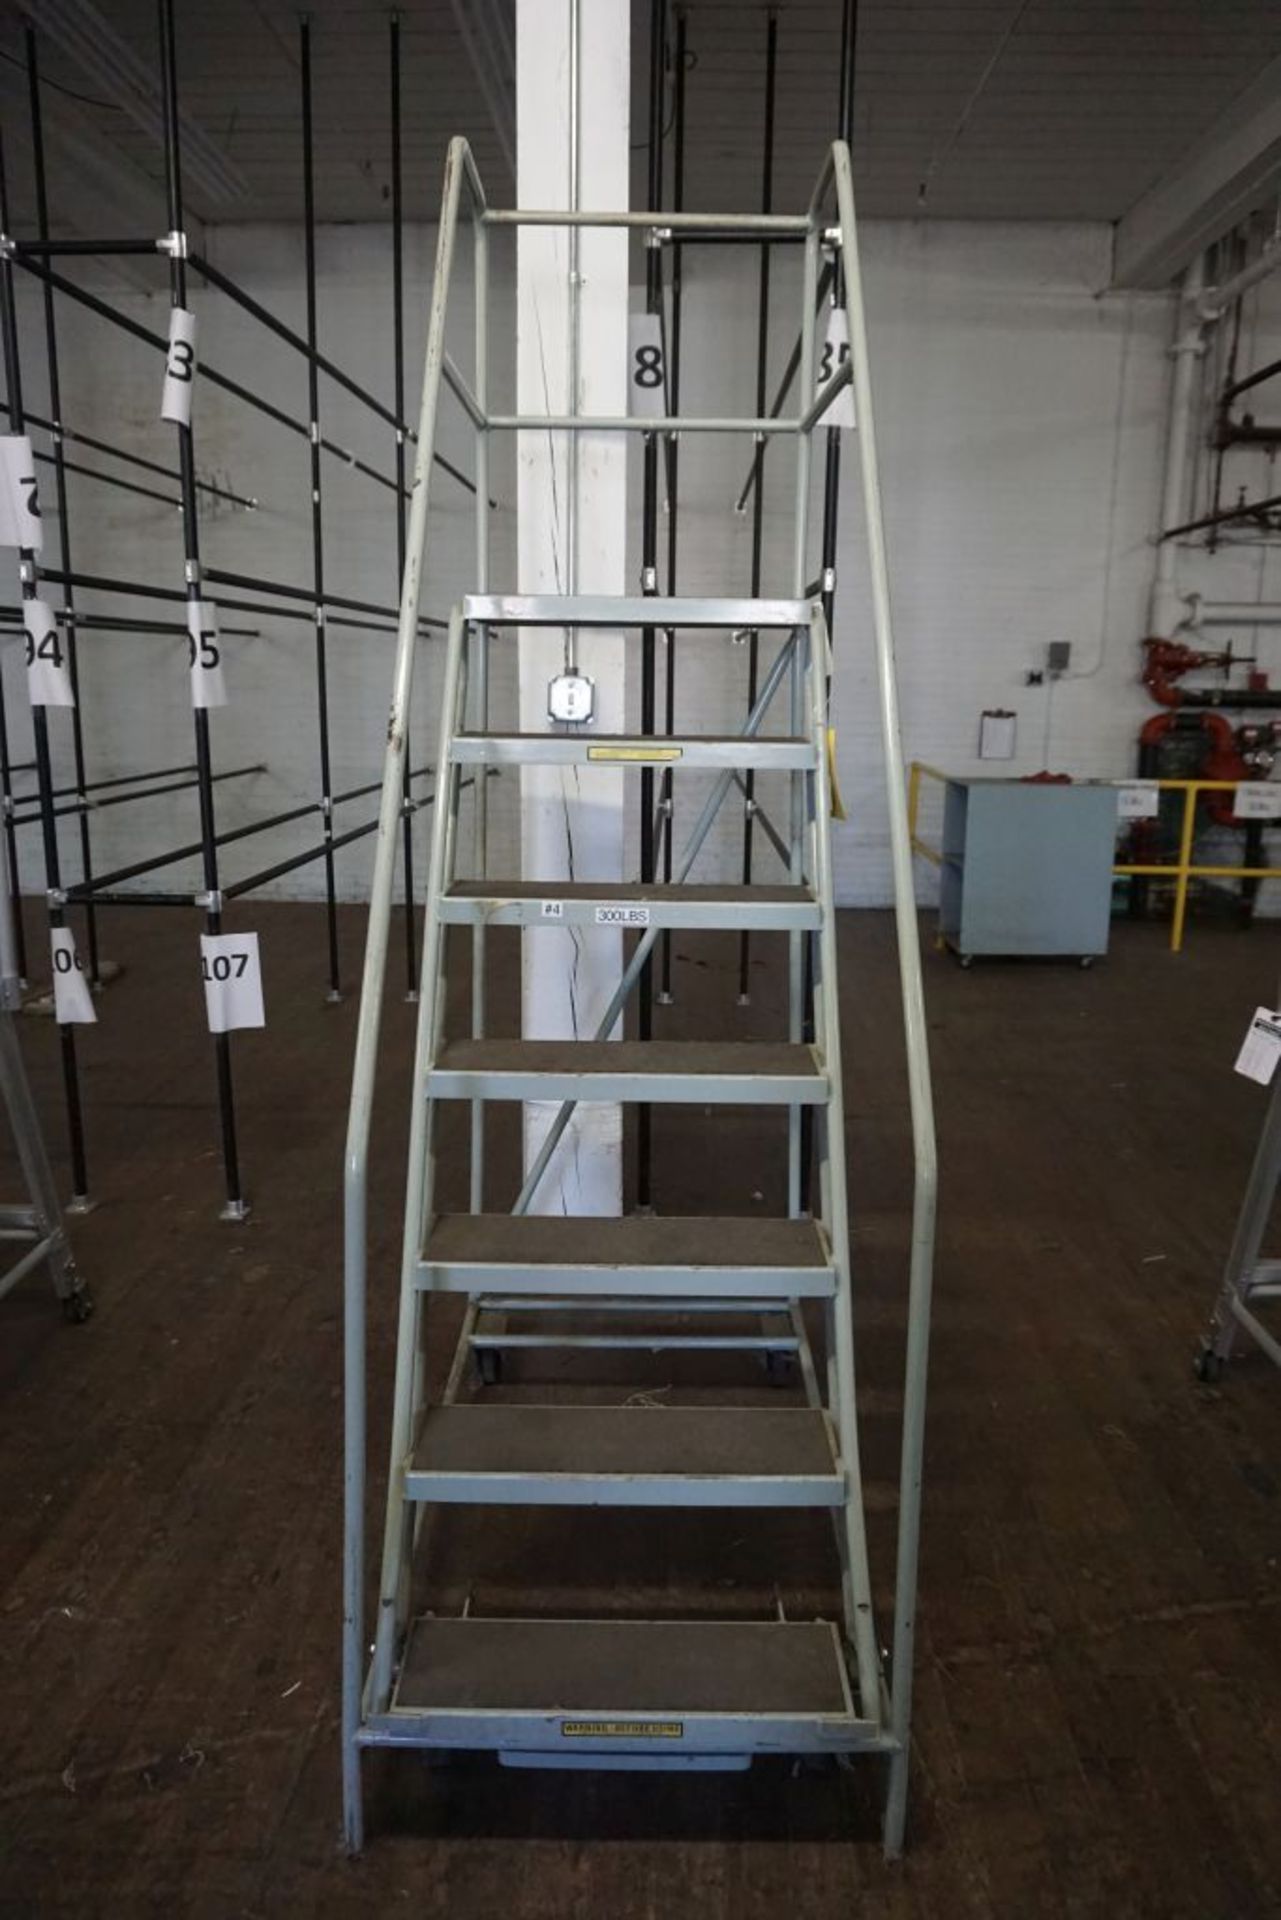 Portable Stairs|72" Platform Height|Lot Tag: 1051